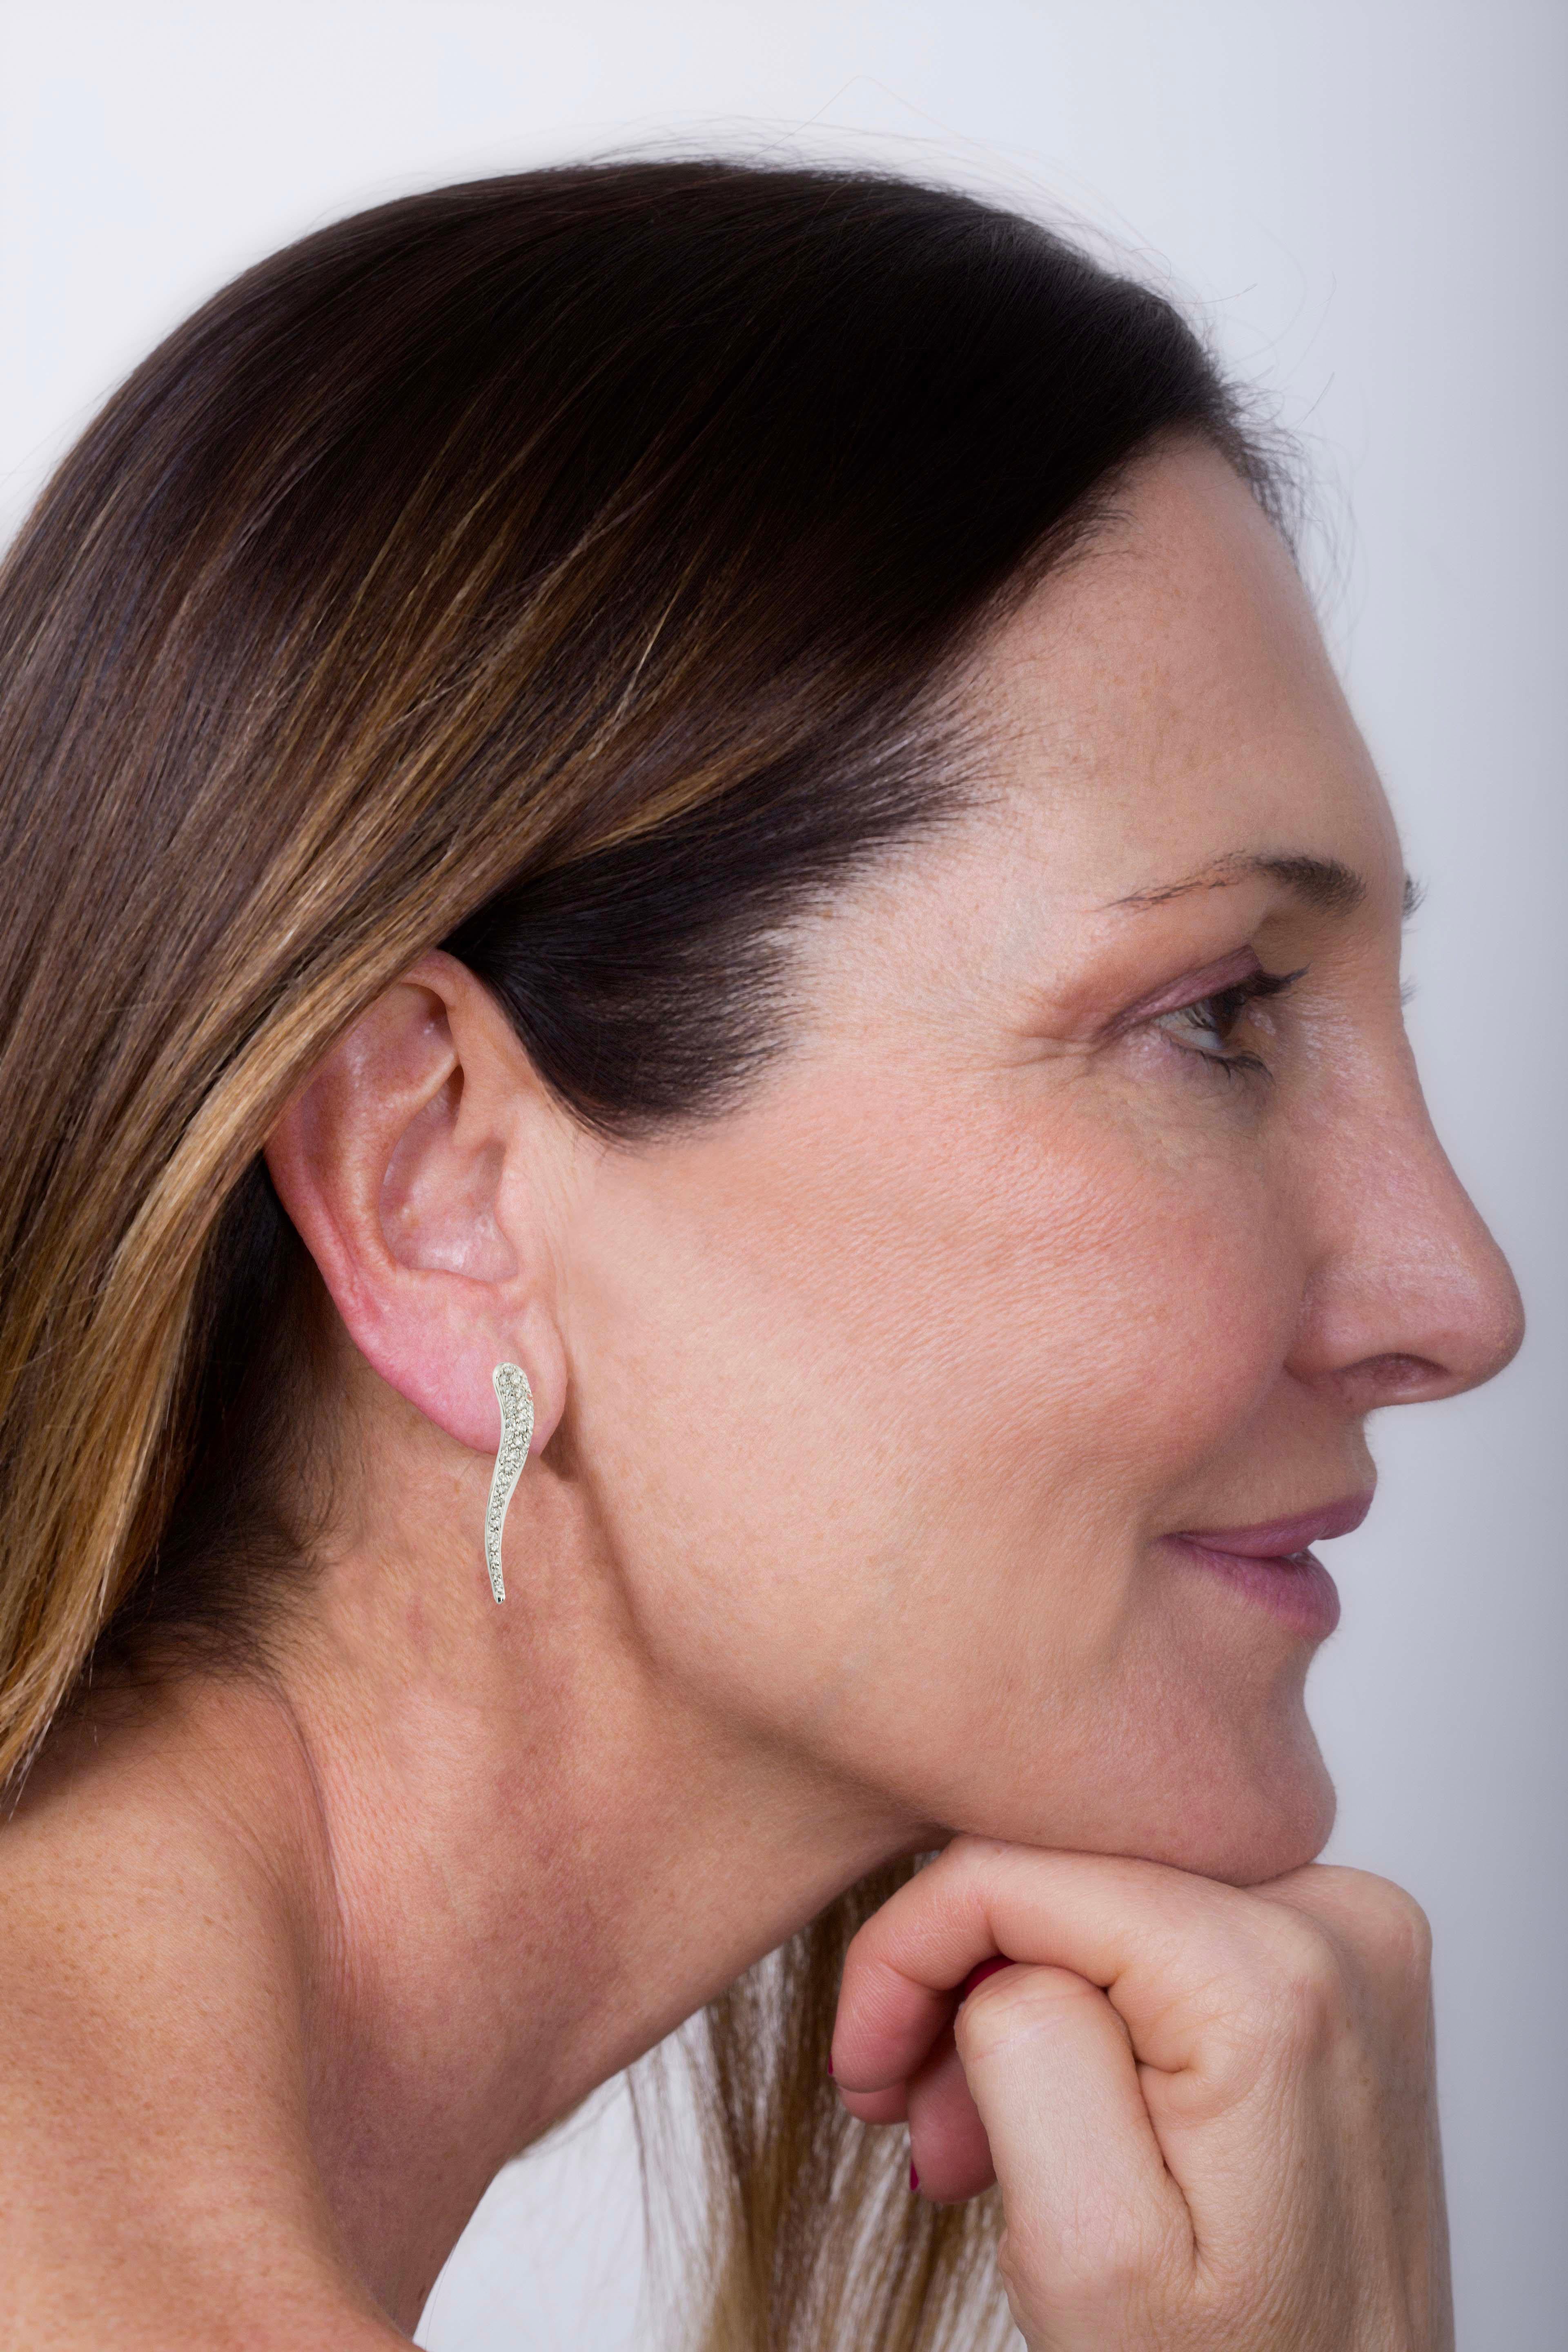 Introducing Rossella Ugolini's exquisite lobe earrings, meticulously crafted in Italy with luxurious pavé Diamonds set in 18K white Gold. These stunning earrings measure 3 cm in length, featuring a unique design comprising a right and left comma